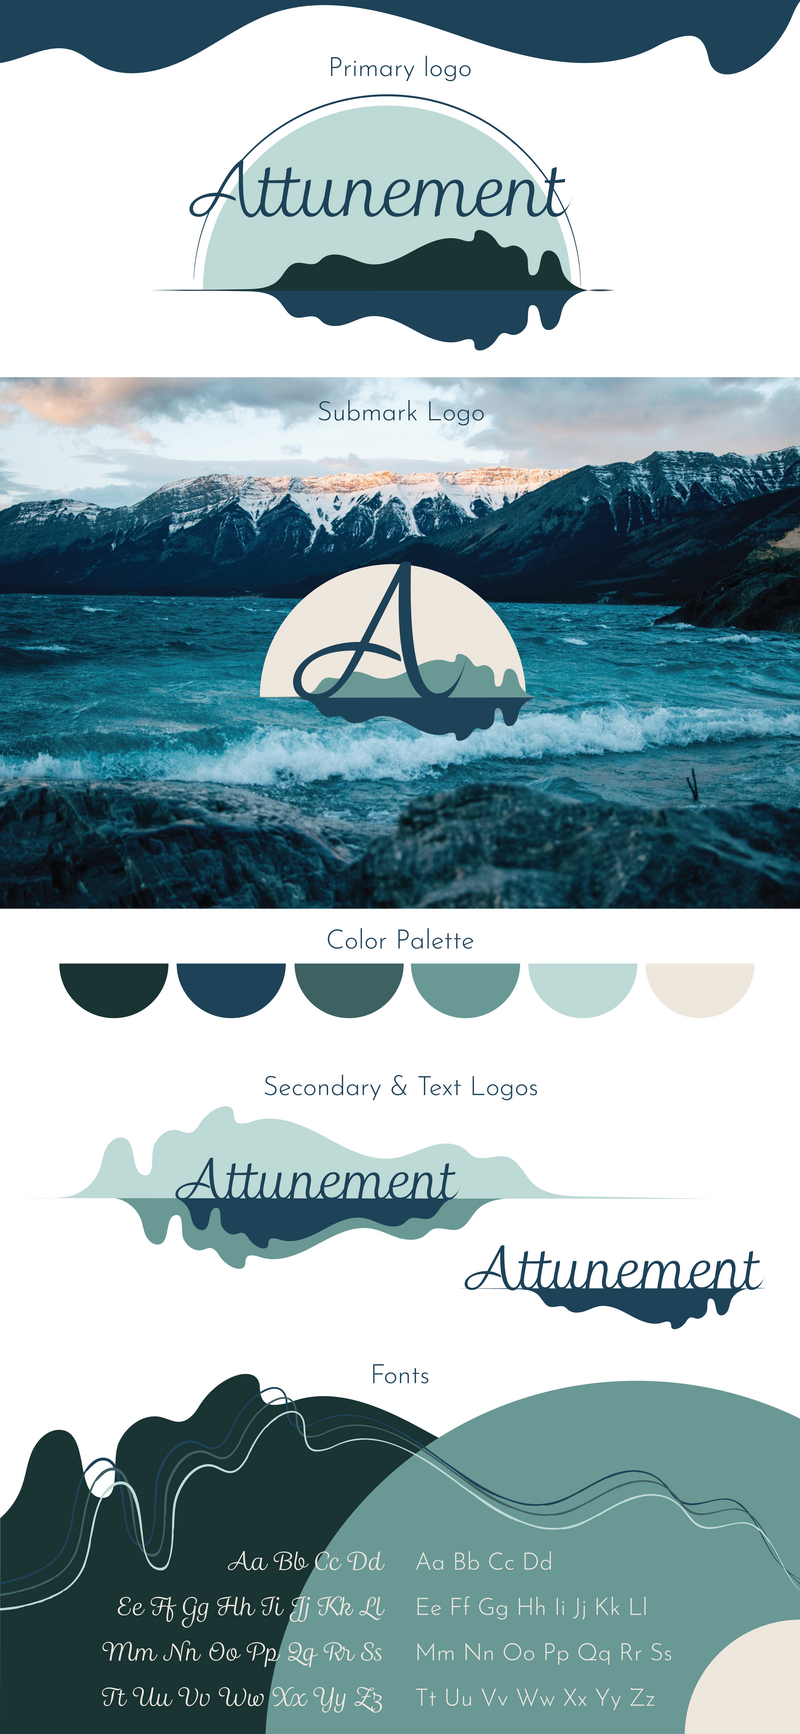 This image provides an encapsulation of the Attunement brand. From top to bottom, it lays out the Attunement Primary lLogo, Submark Logo, Color Palette, Secondary  and Text Logos, and , finally, the brand fonts.